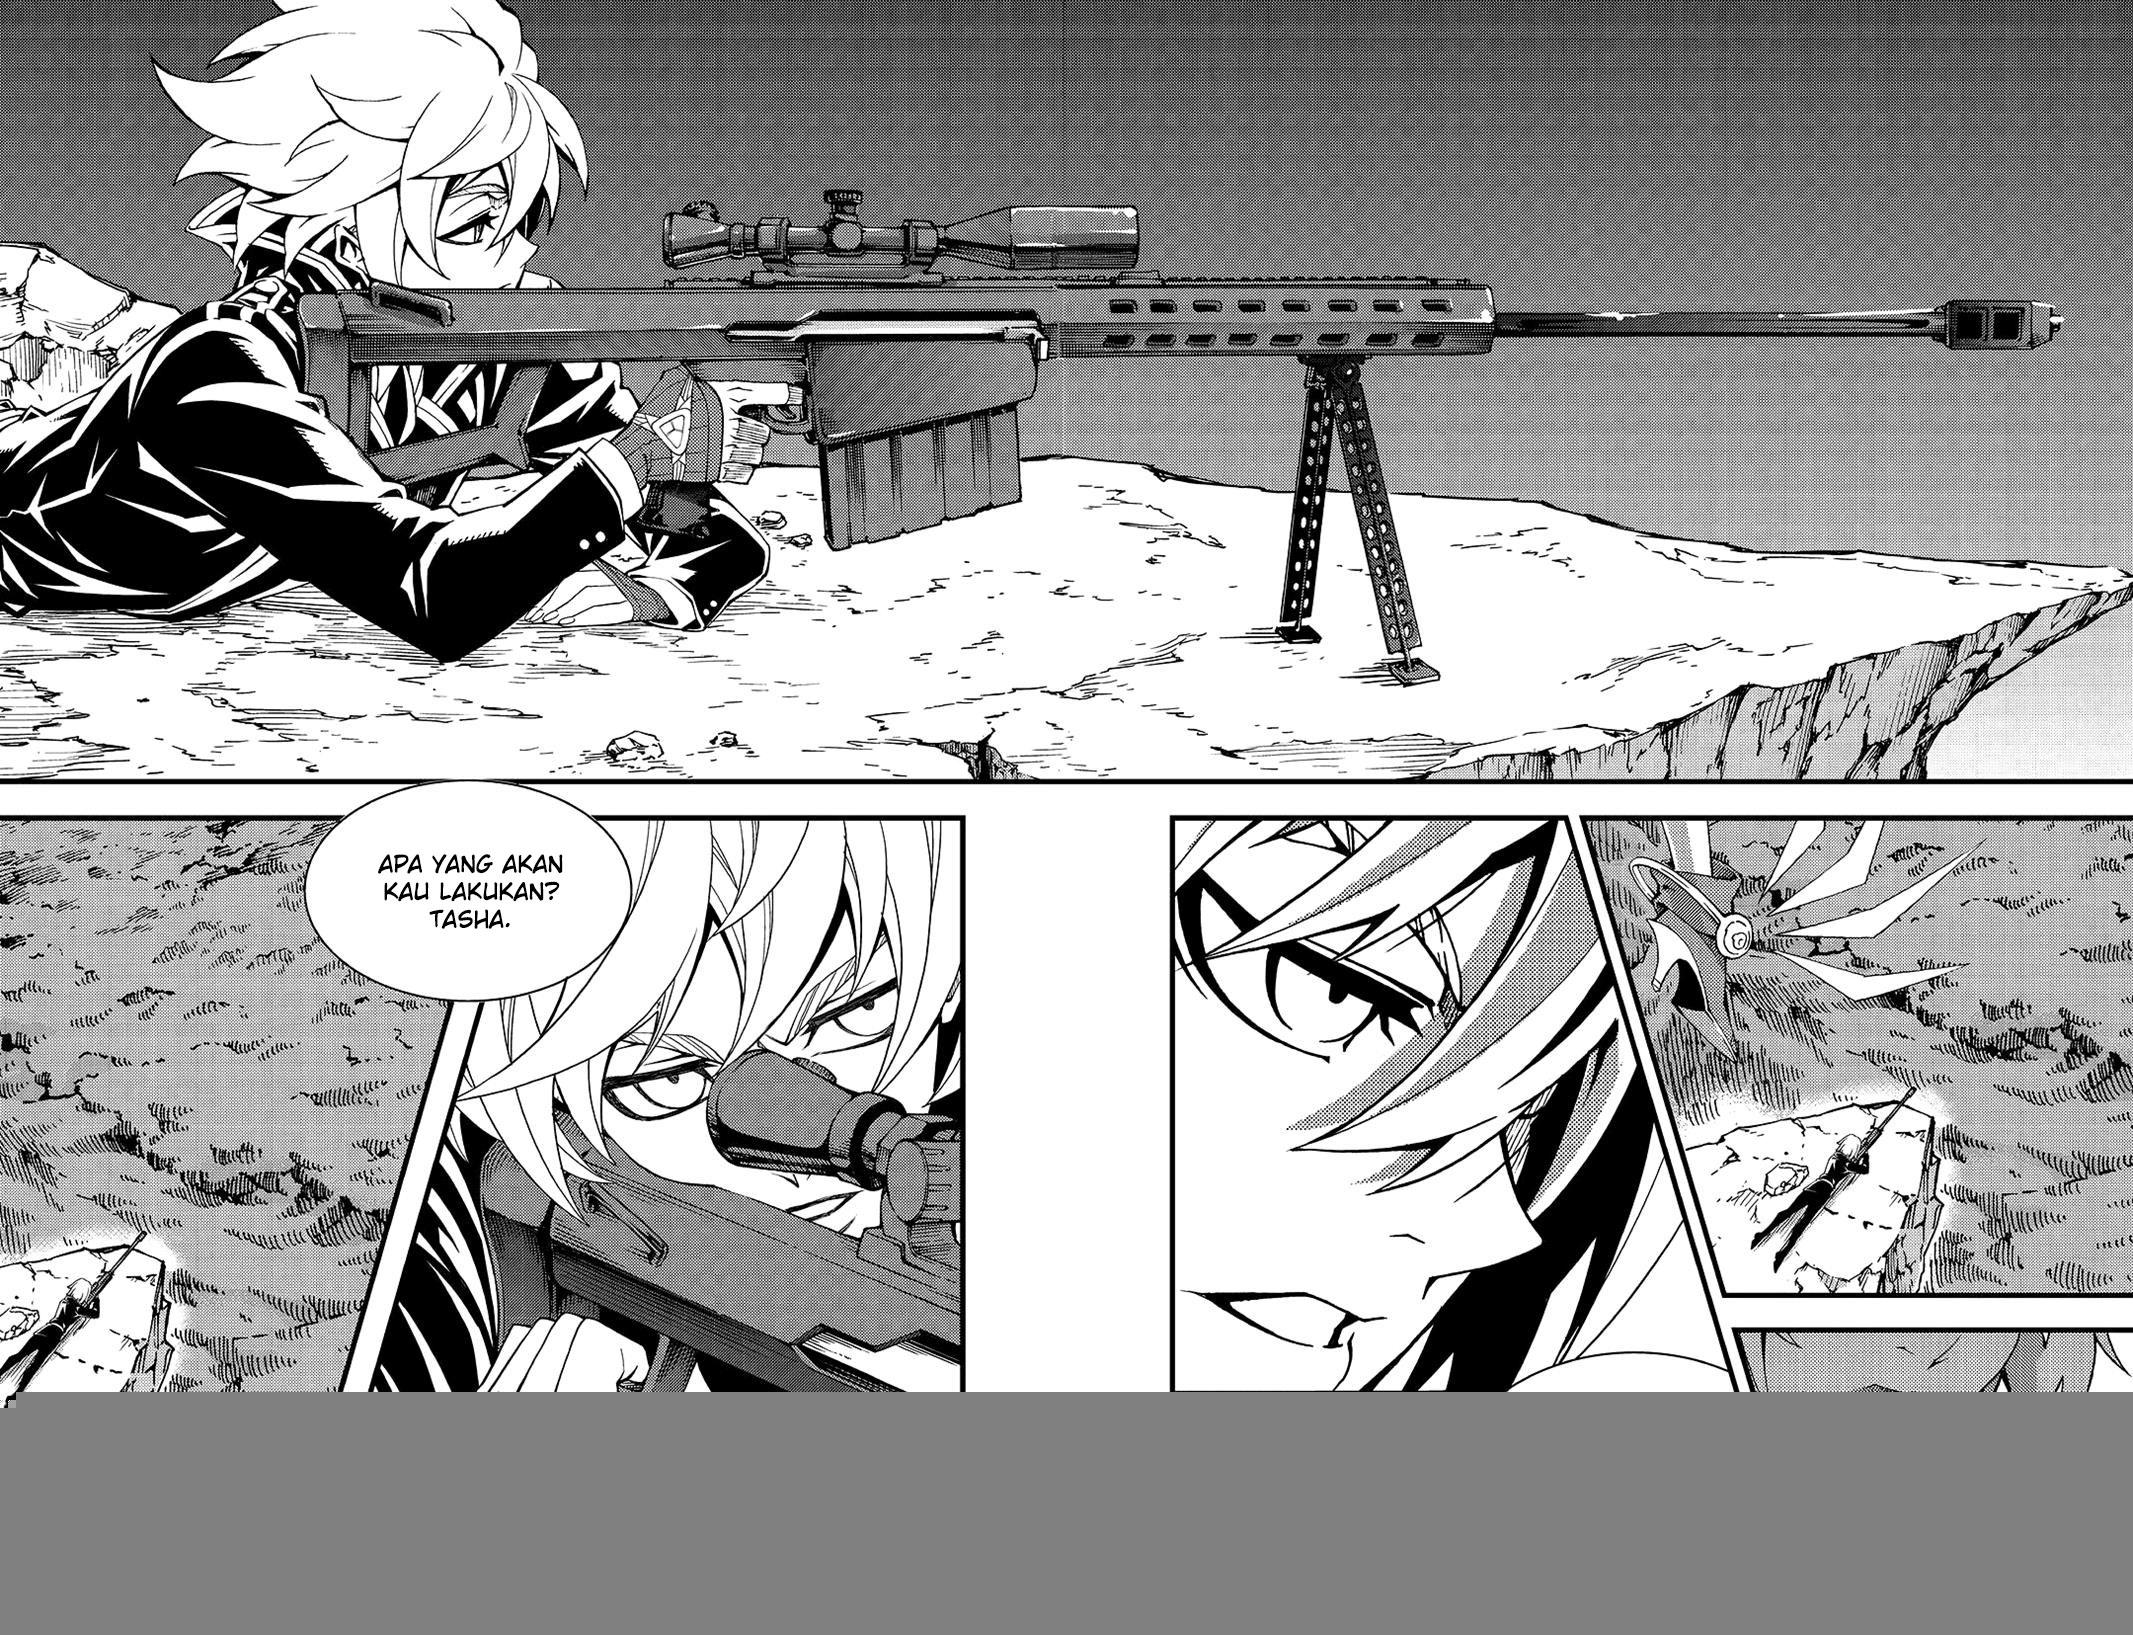 Witch Hunter Chapter 207